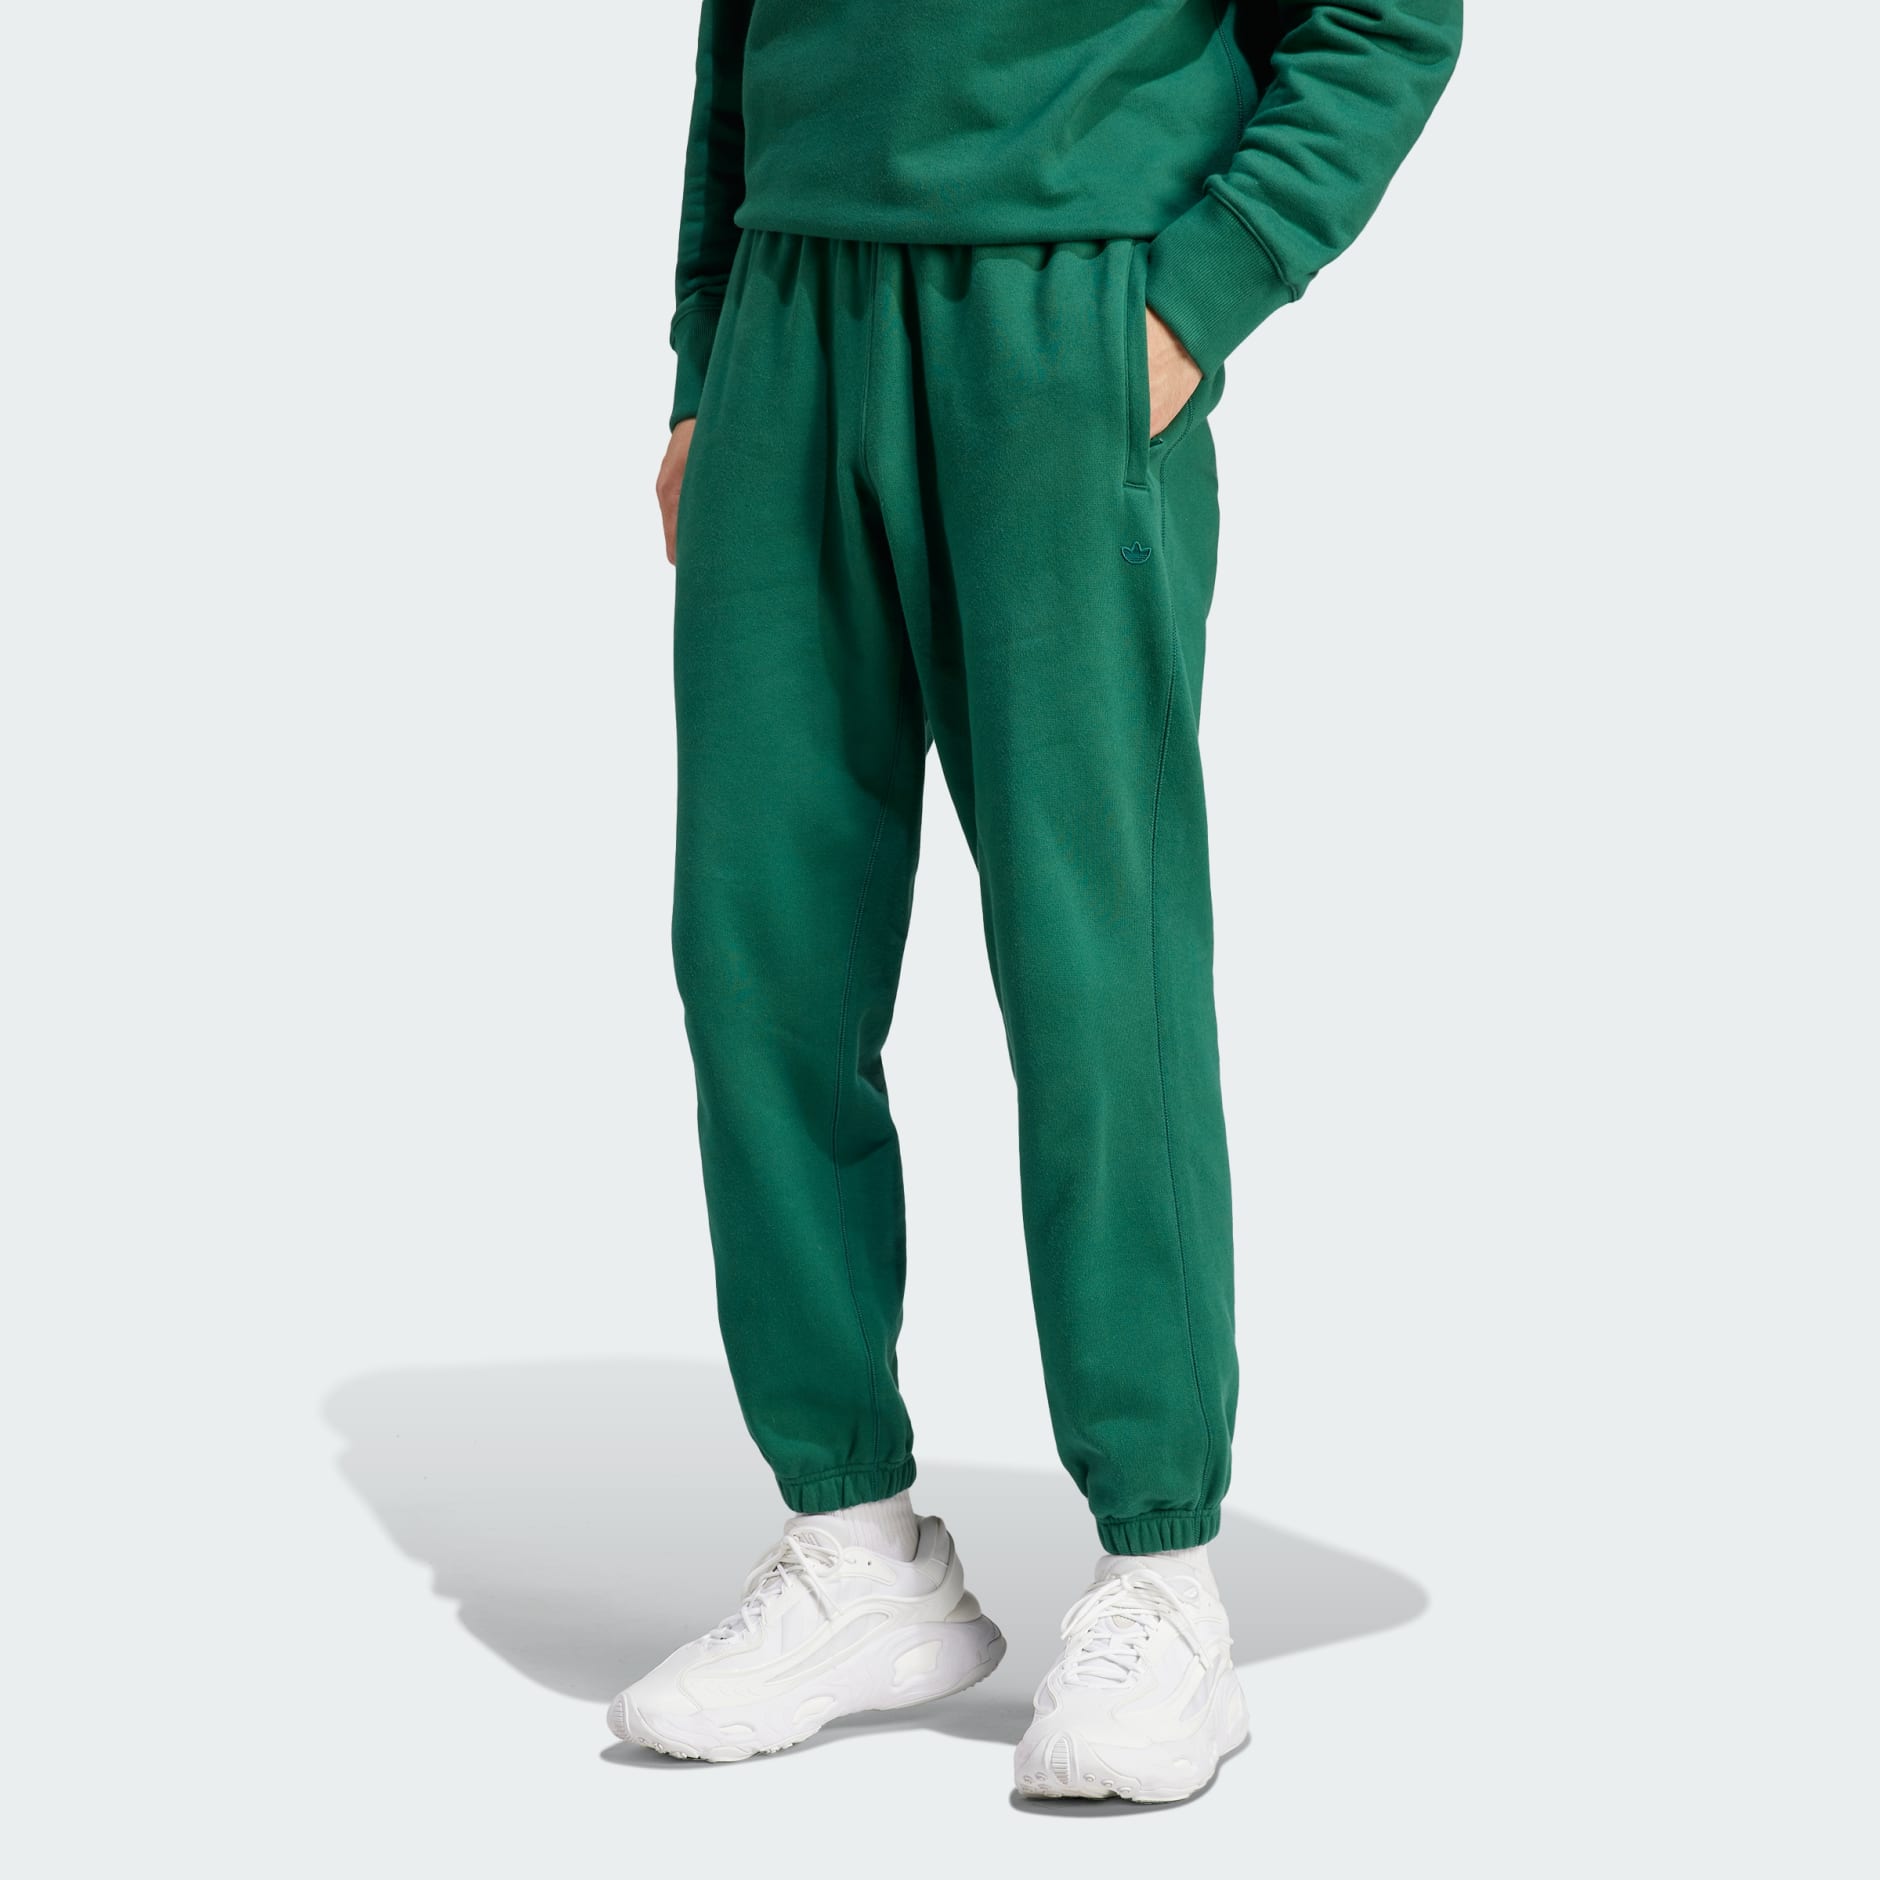 adidas Adicolor Contempo French Terry Sweat Pants - Green | adidas UAE